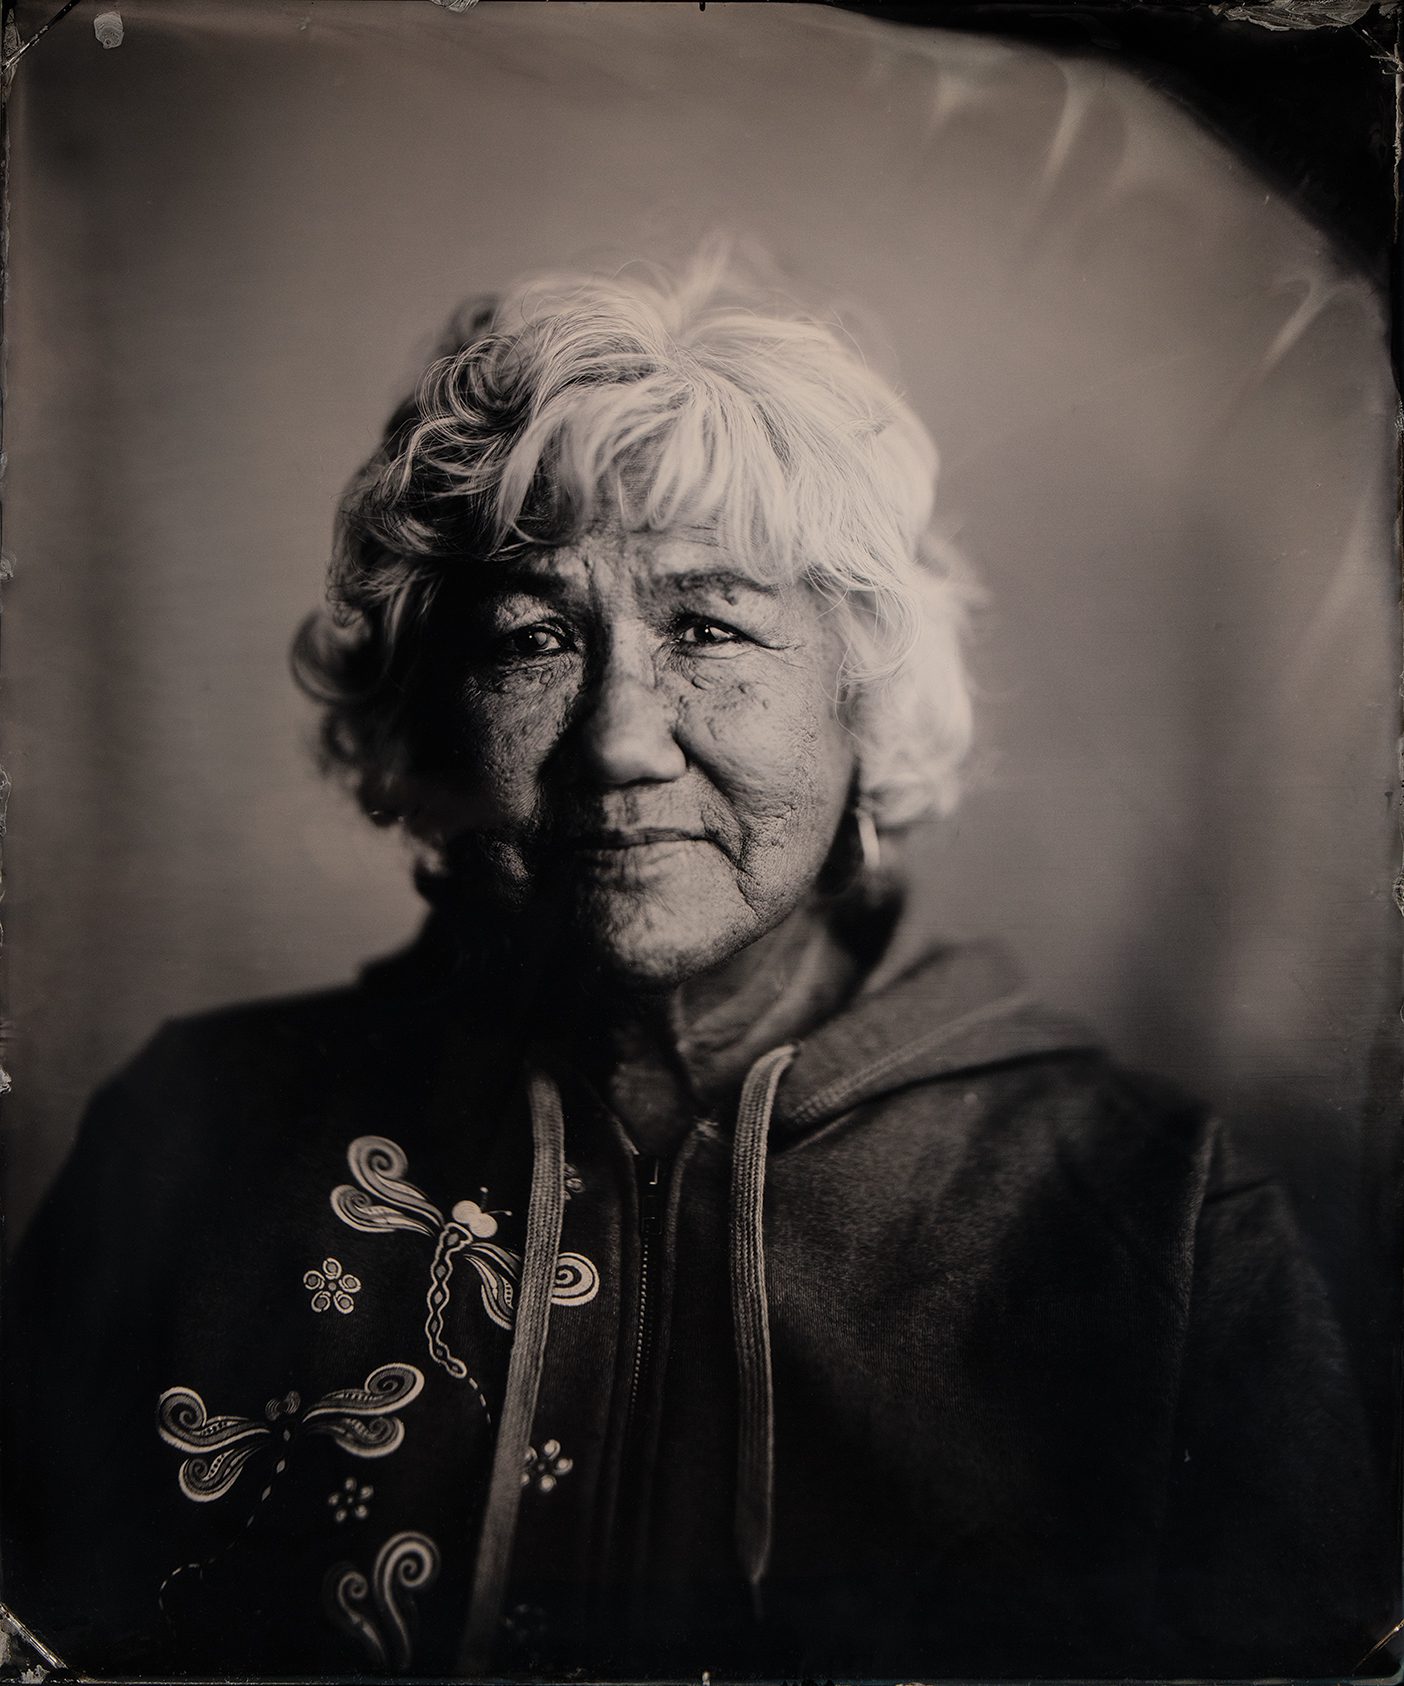 Black-and-white tintype photograph of a Native Alaskan woman in a jacket